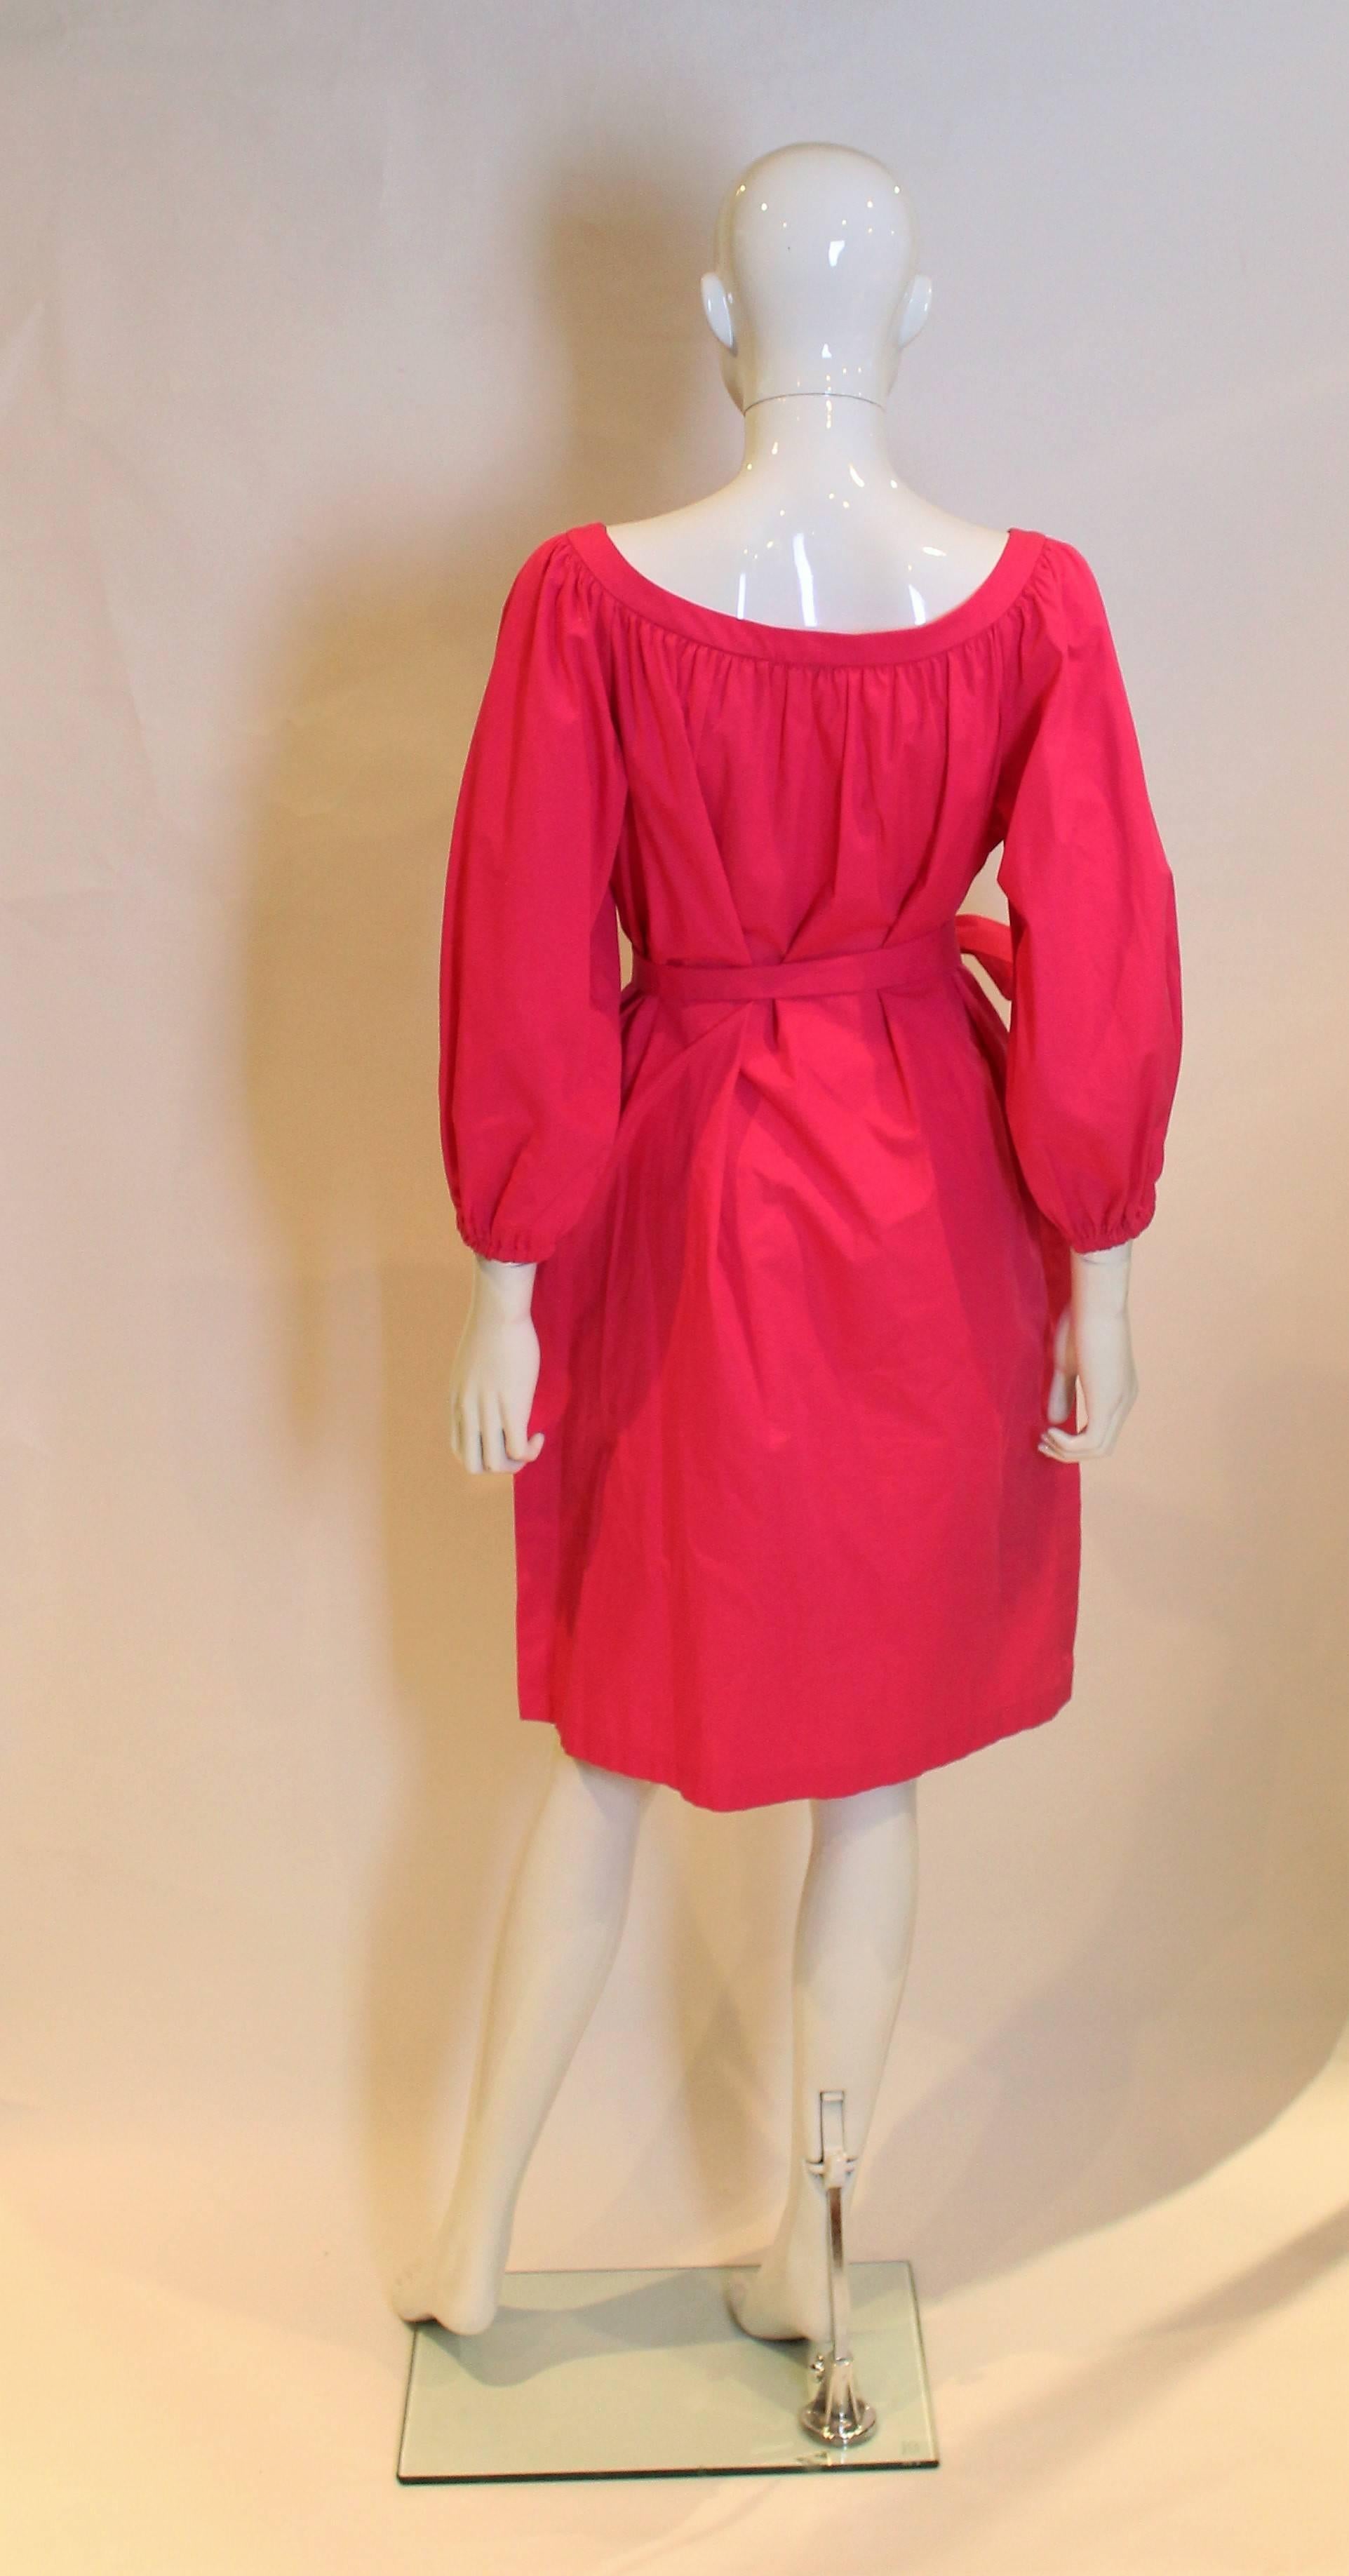 A great dress for Spring/Summer by Yves Saint Laurent Rive Gauche. In a pretty pink colour, this cotton dress has a round neckline, elbow length sleeves and a pocket on either side. There is an 11'' slit on either side, and a self fabric tie belt